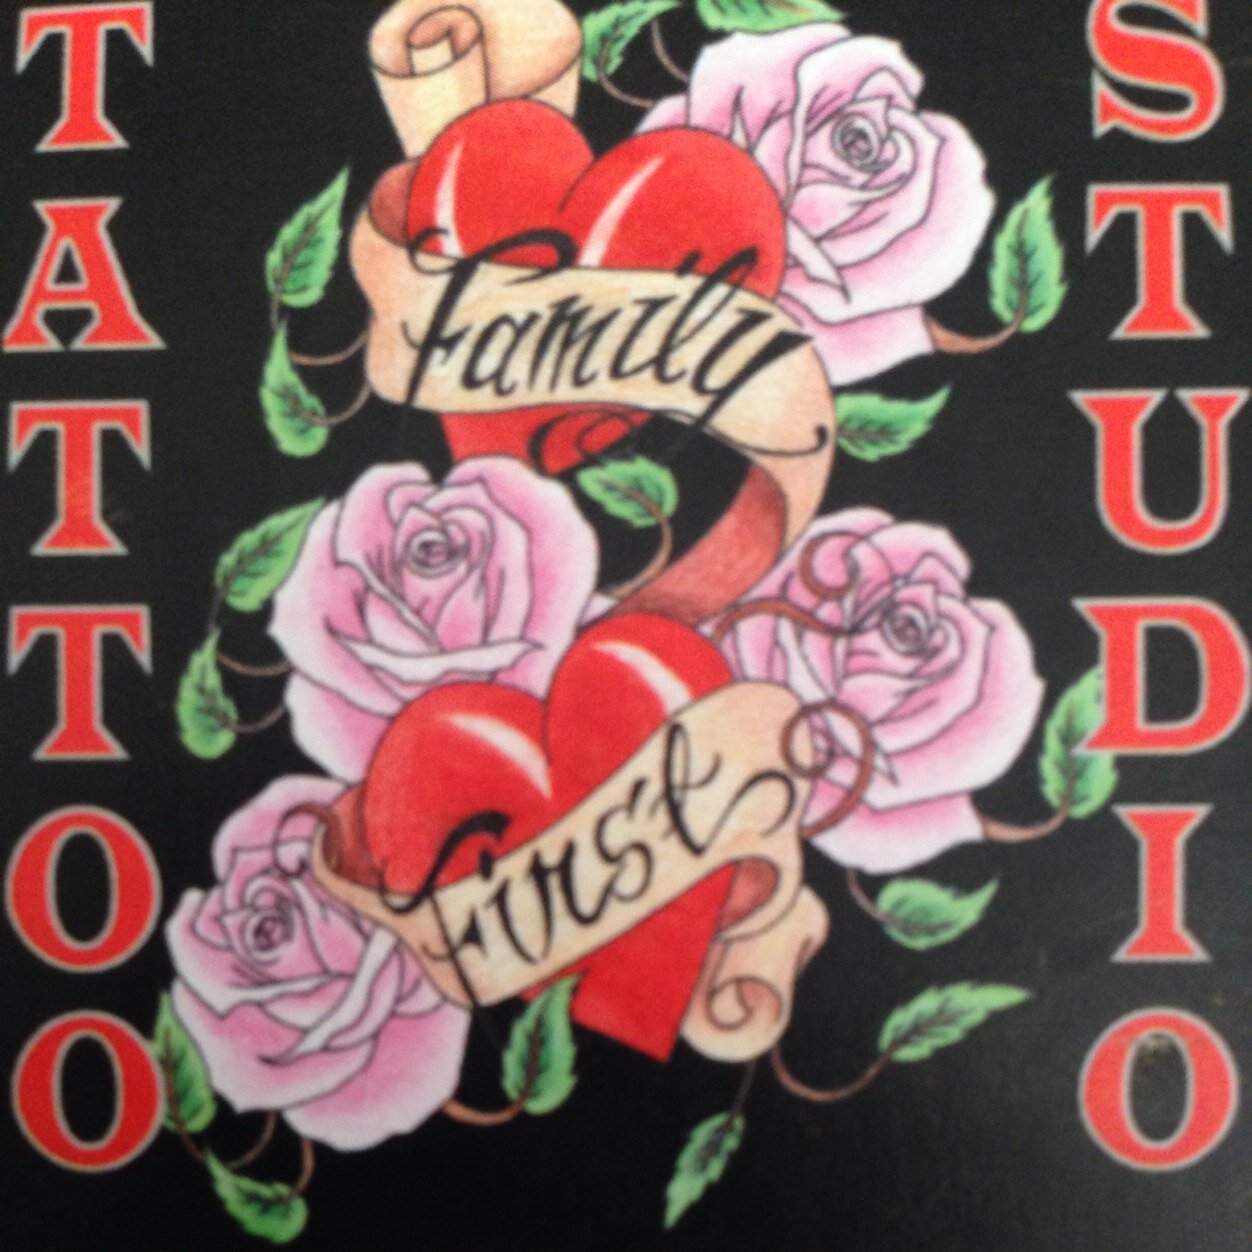 FamilyFirst Tattoo And Piercing Studio Opening Times - 11-5 Tuesday To Saturday For Bookings Or Any Enquiries - 01482 881818 Or Come Pop In